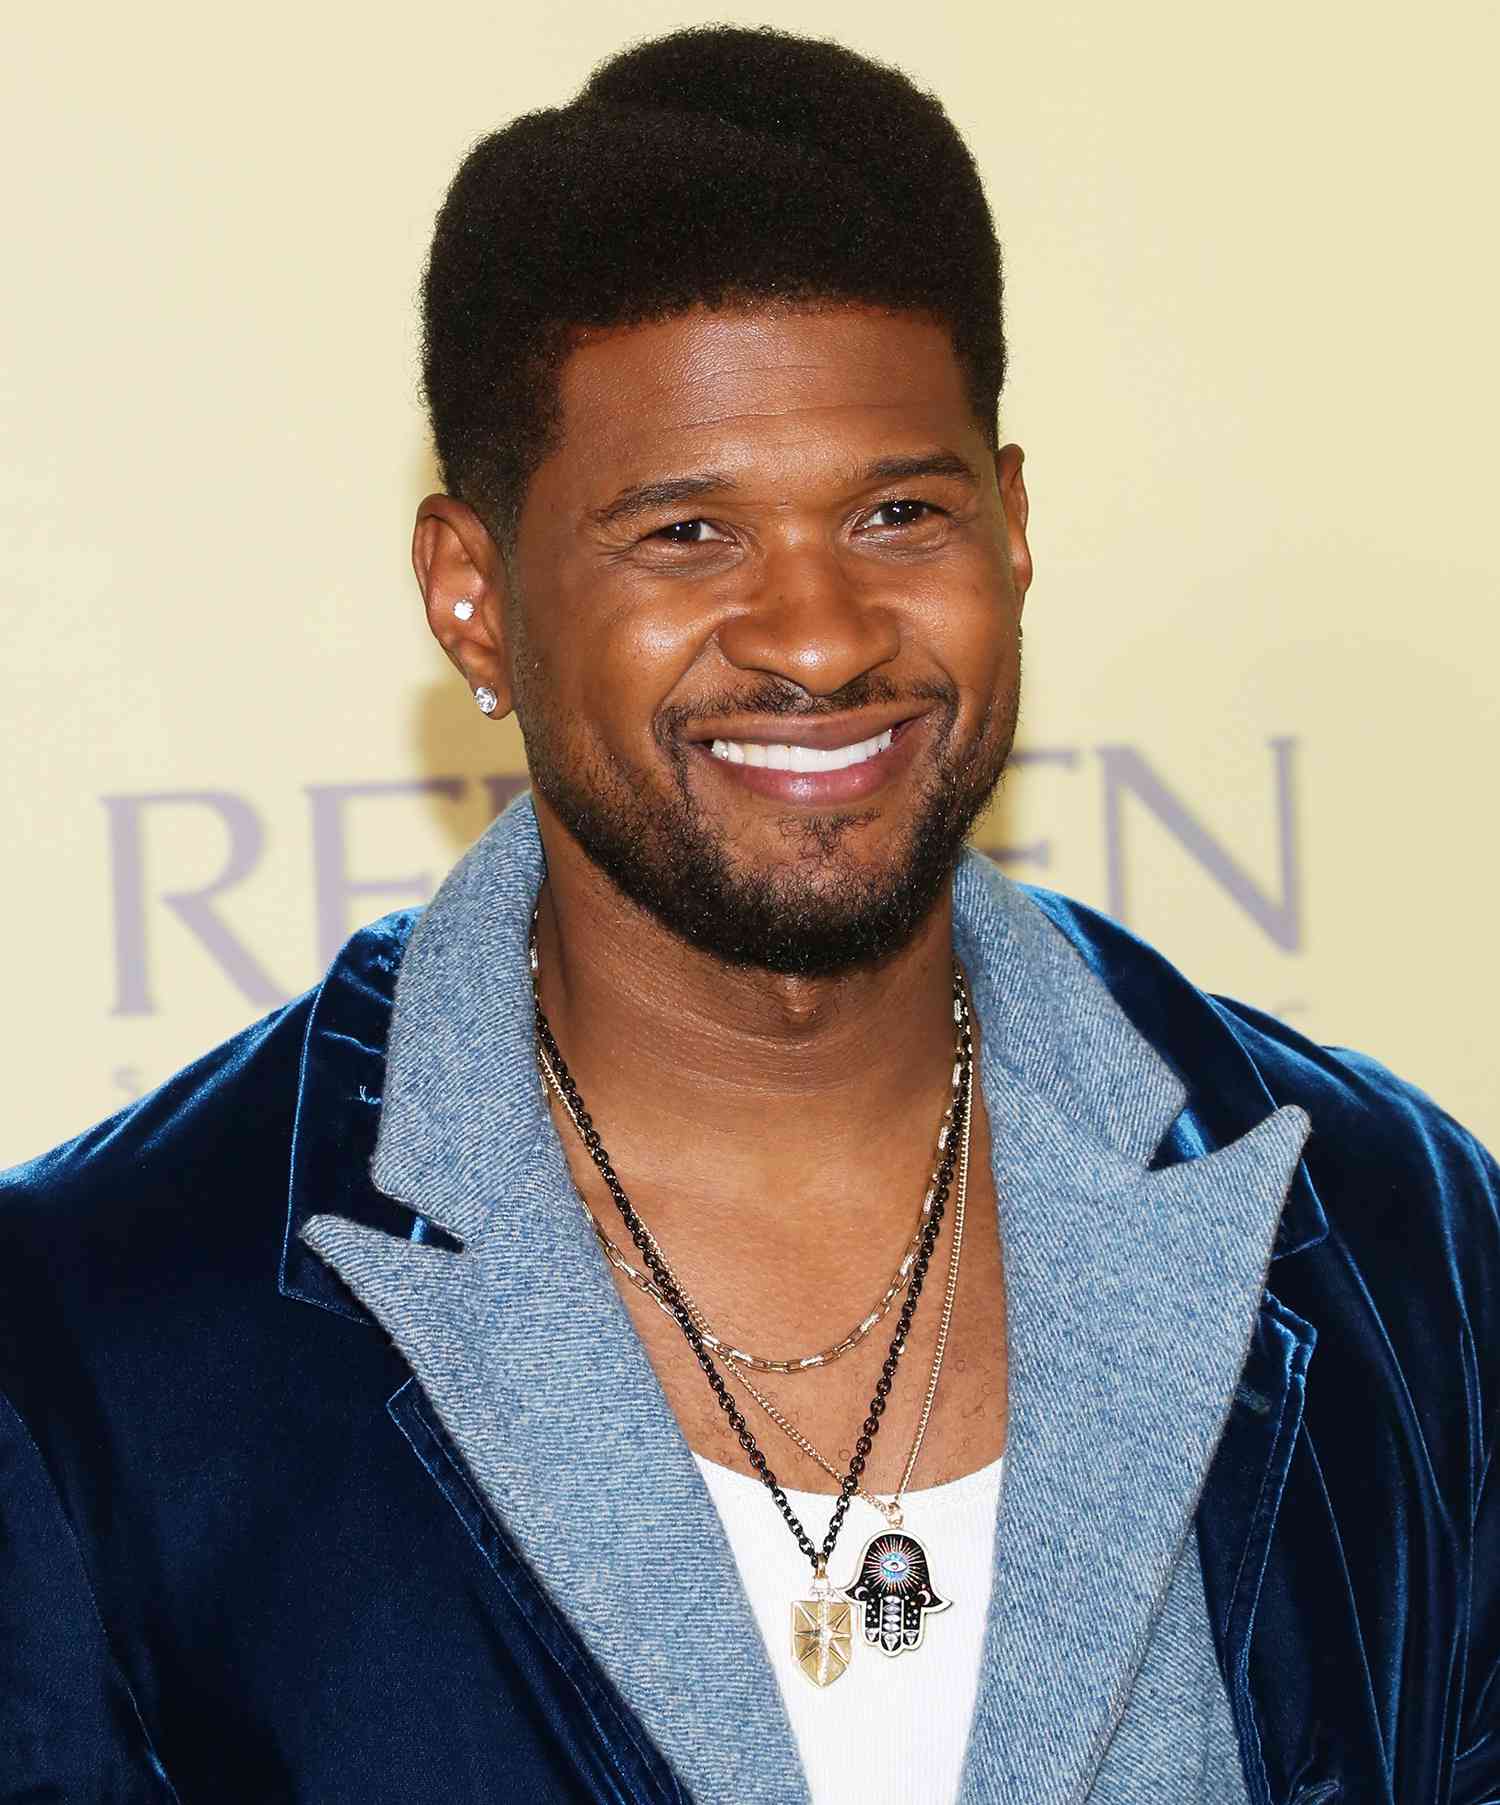 Singer / Songwriter Usher attends the 3rd night of the 2021 Los Angeles Fashion Week on October 09, 2021 in Los Angeles